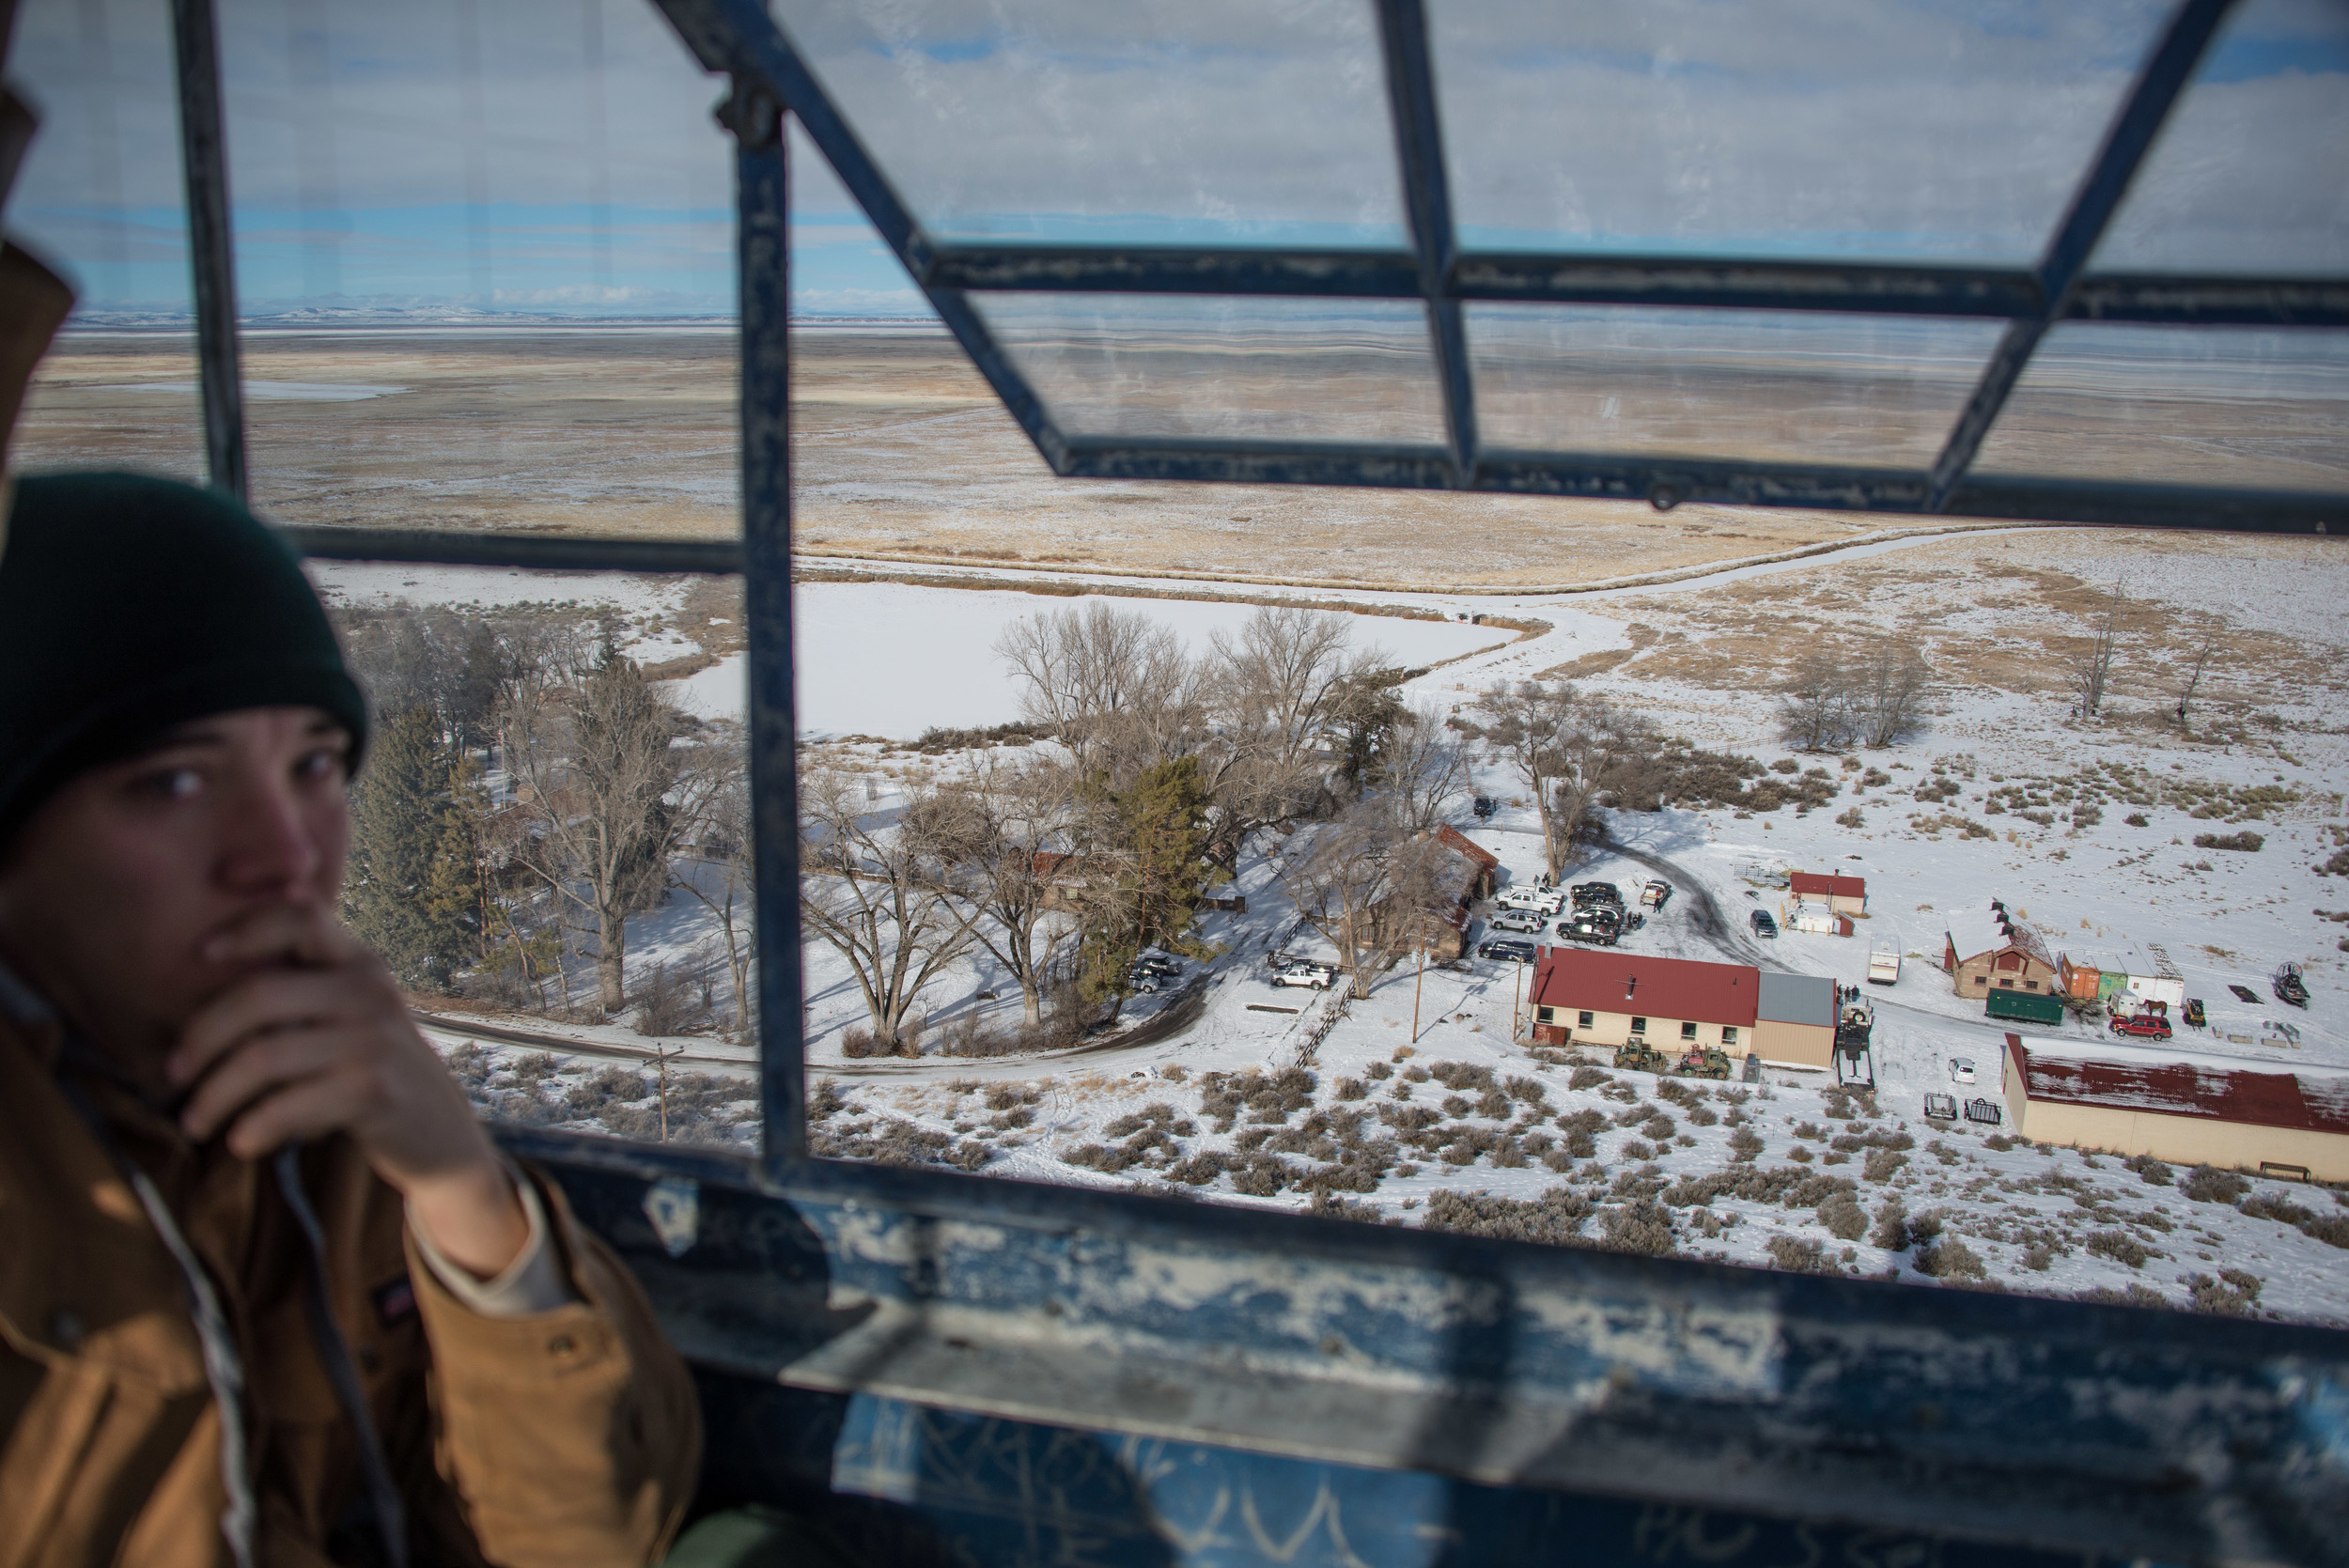 Armed Activists in Malheur Watchtower